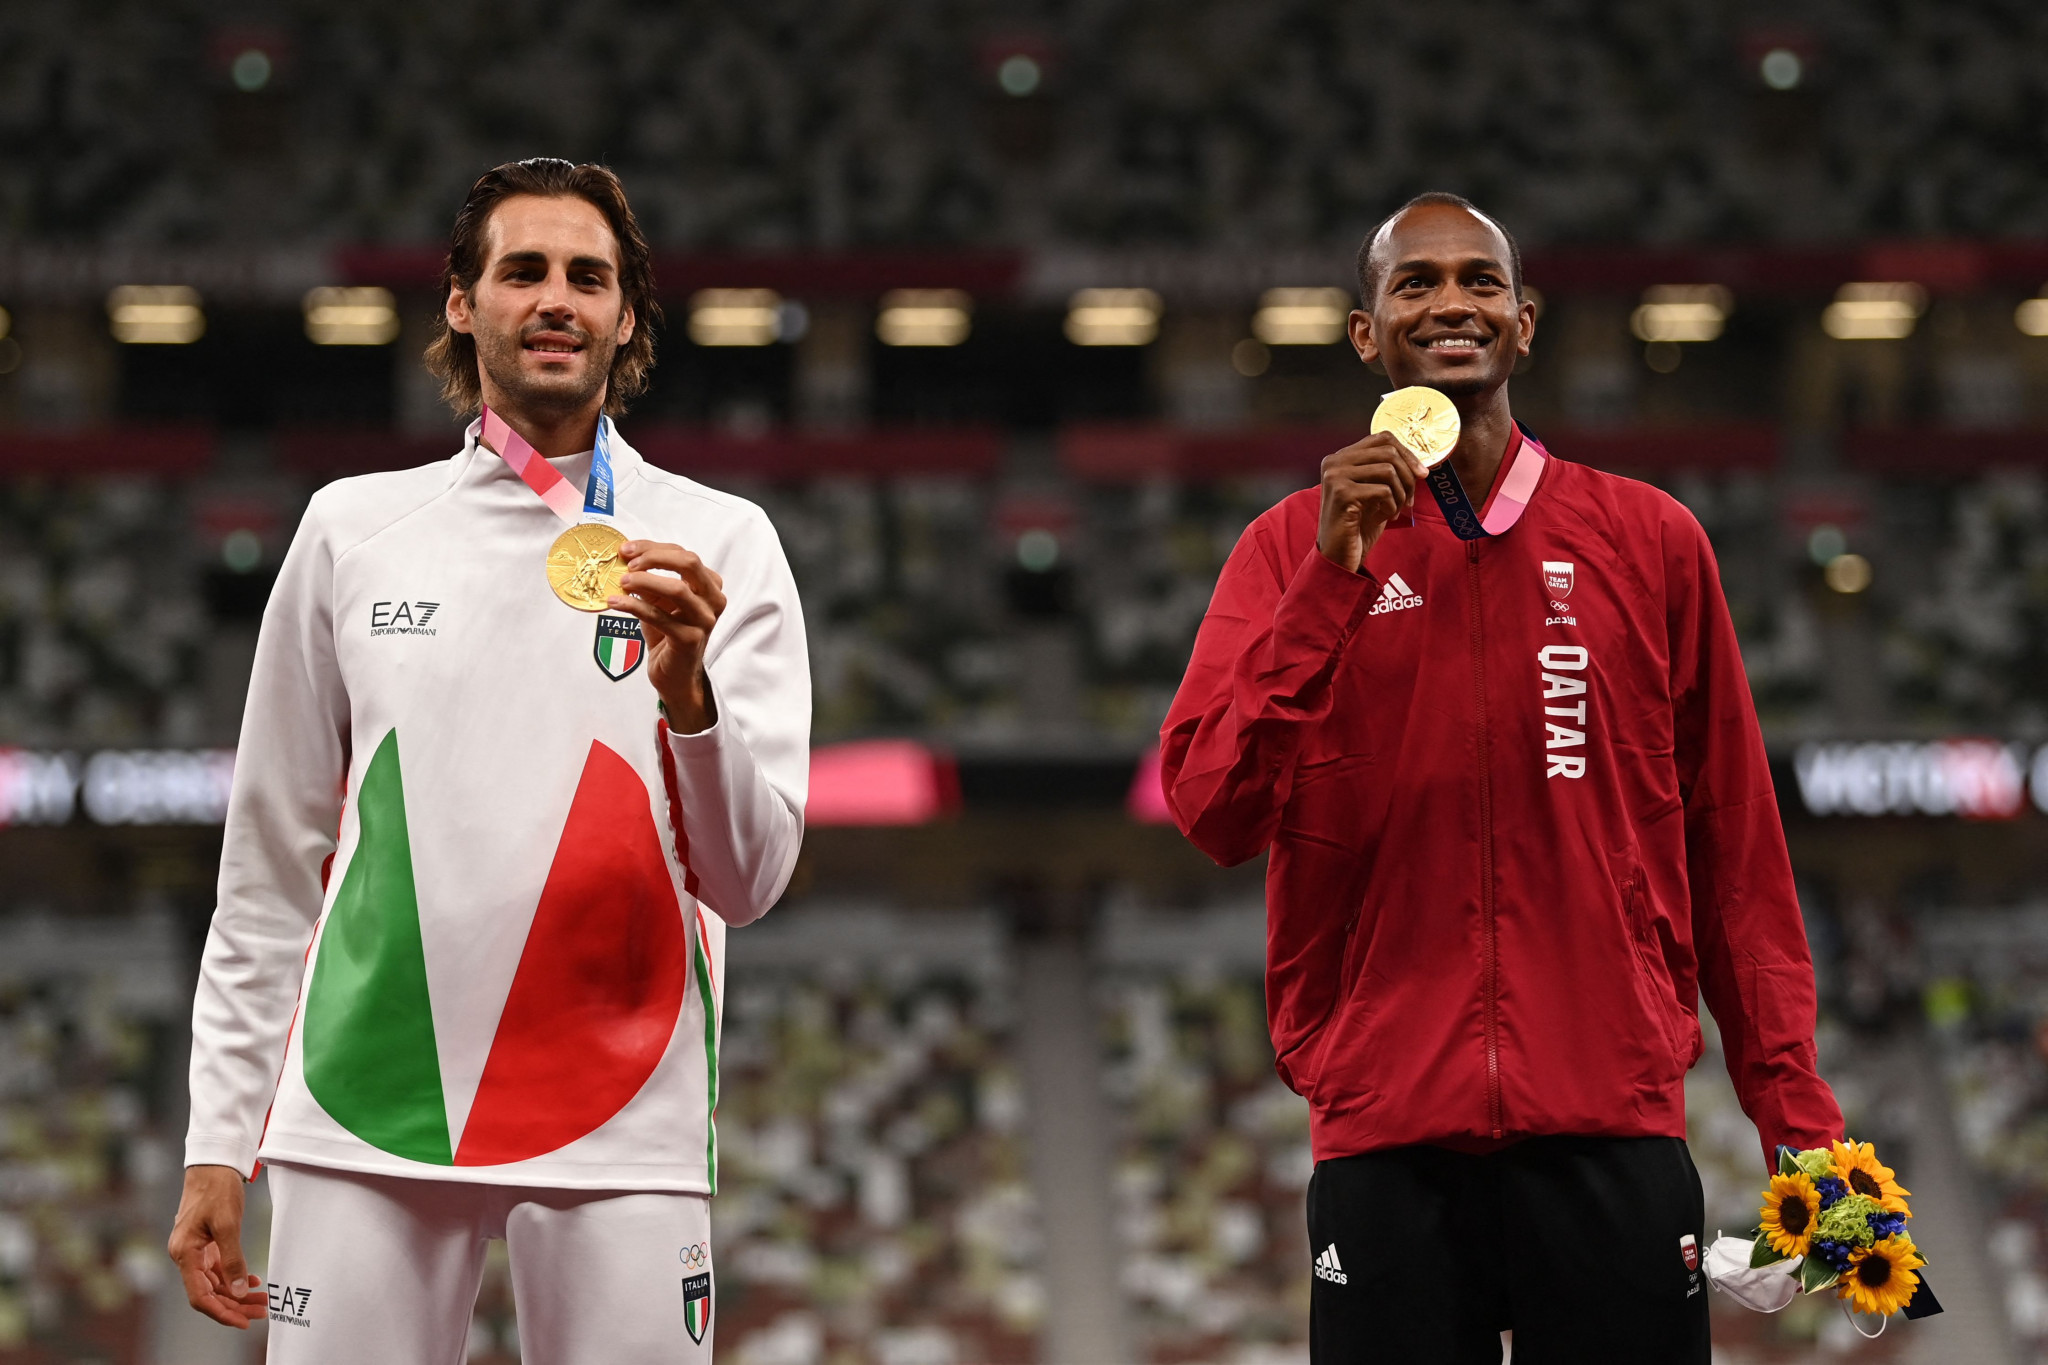 Golden double - Gianmarco Tamberi and Mutaz Barshim on the podium after their decision to share the Tokyo 2020 high jump title ©Getty Images